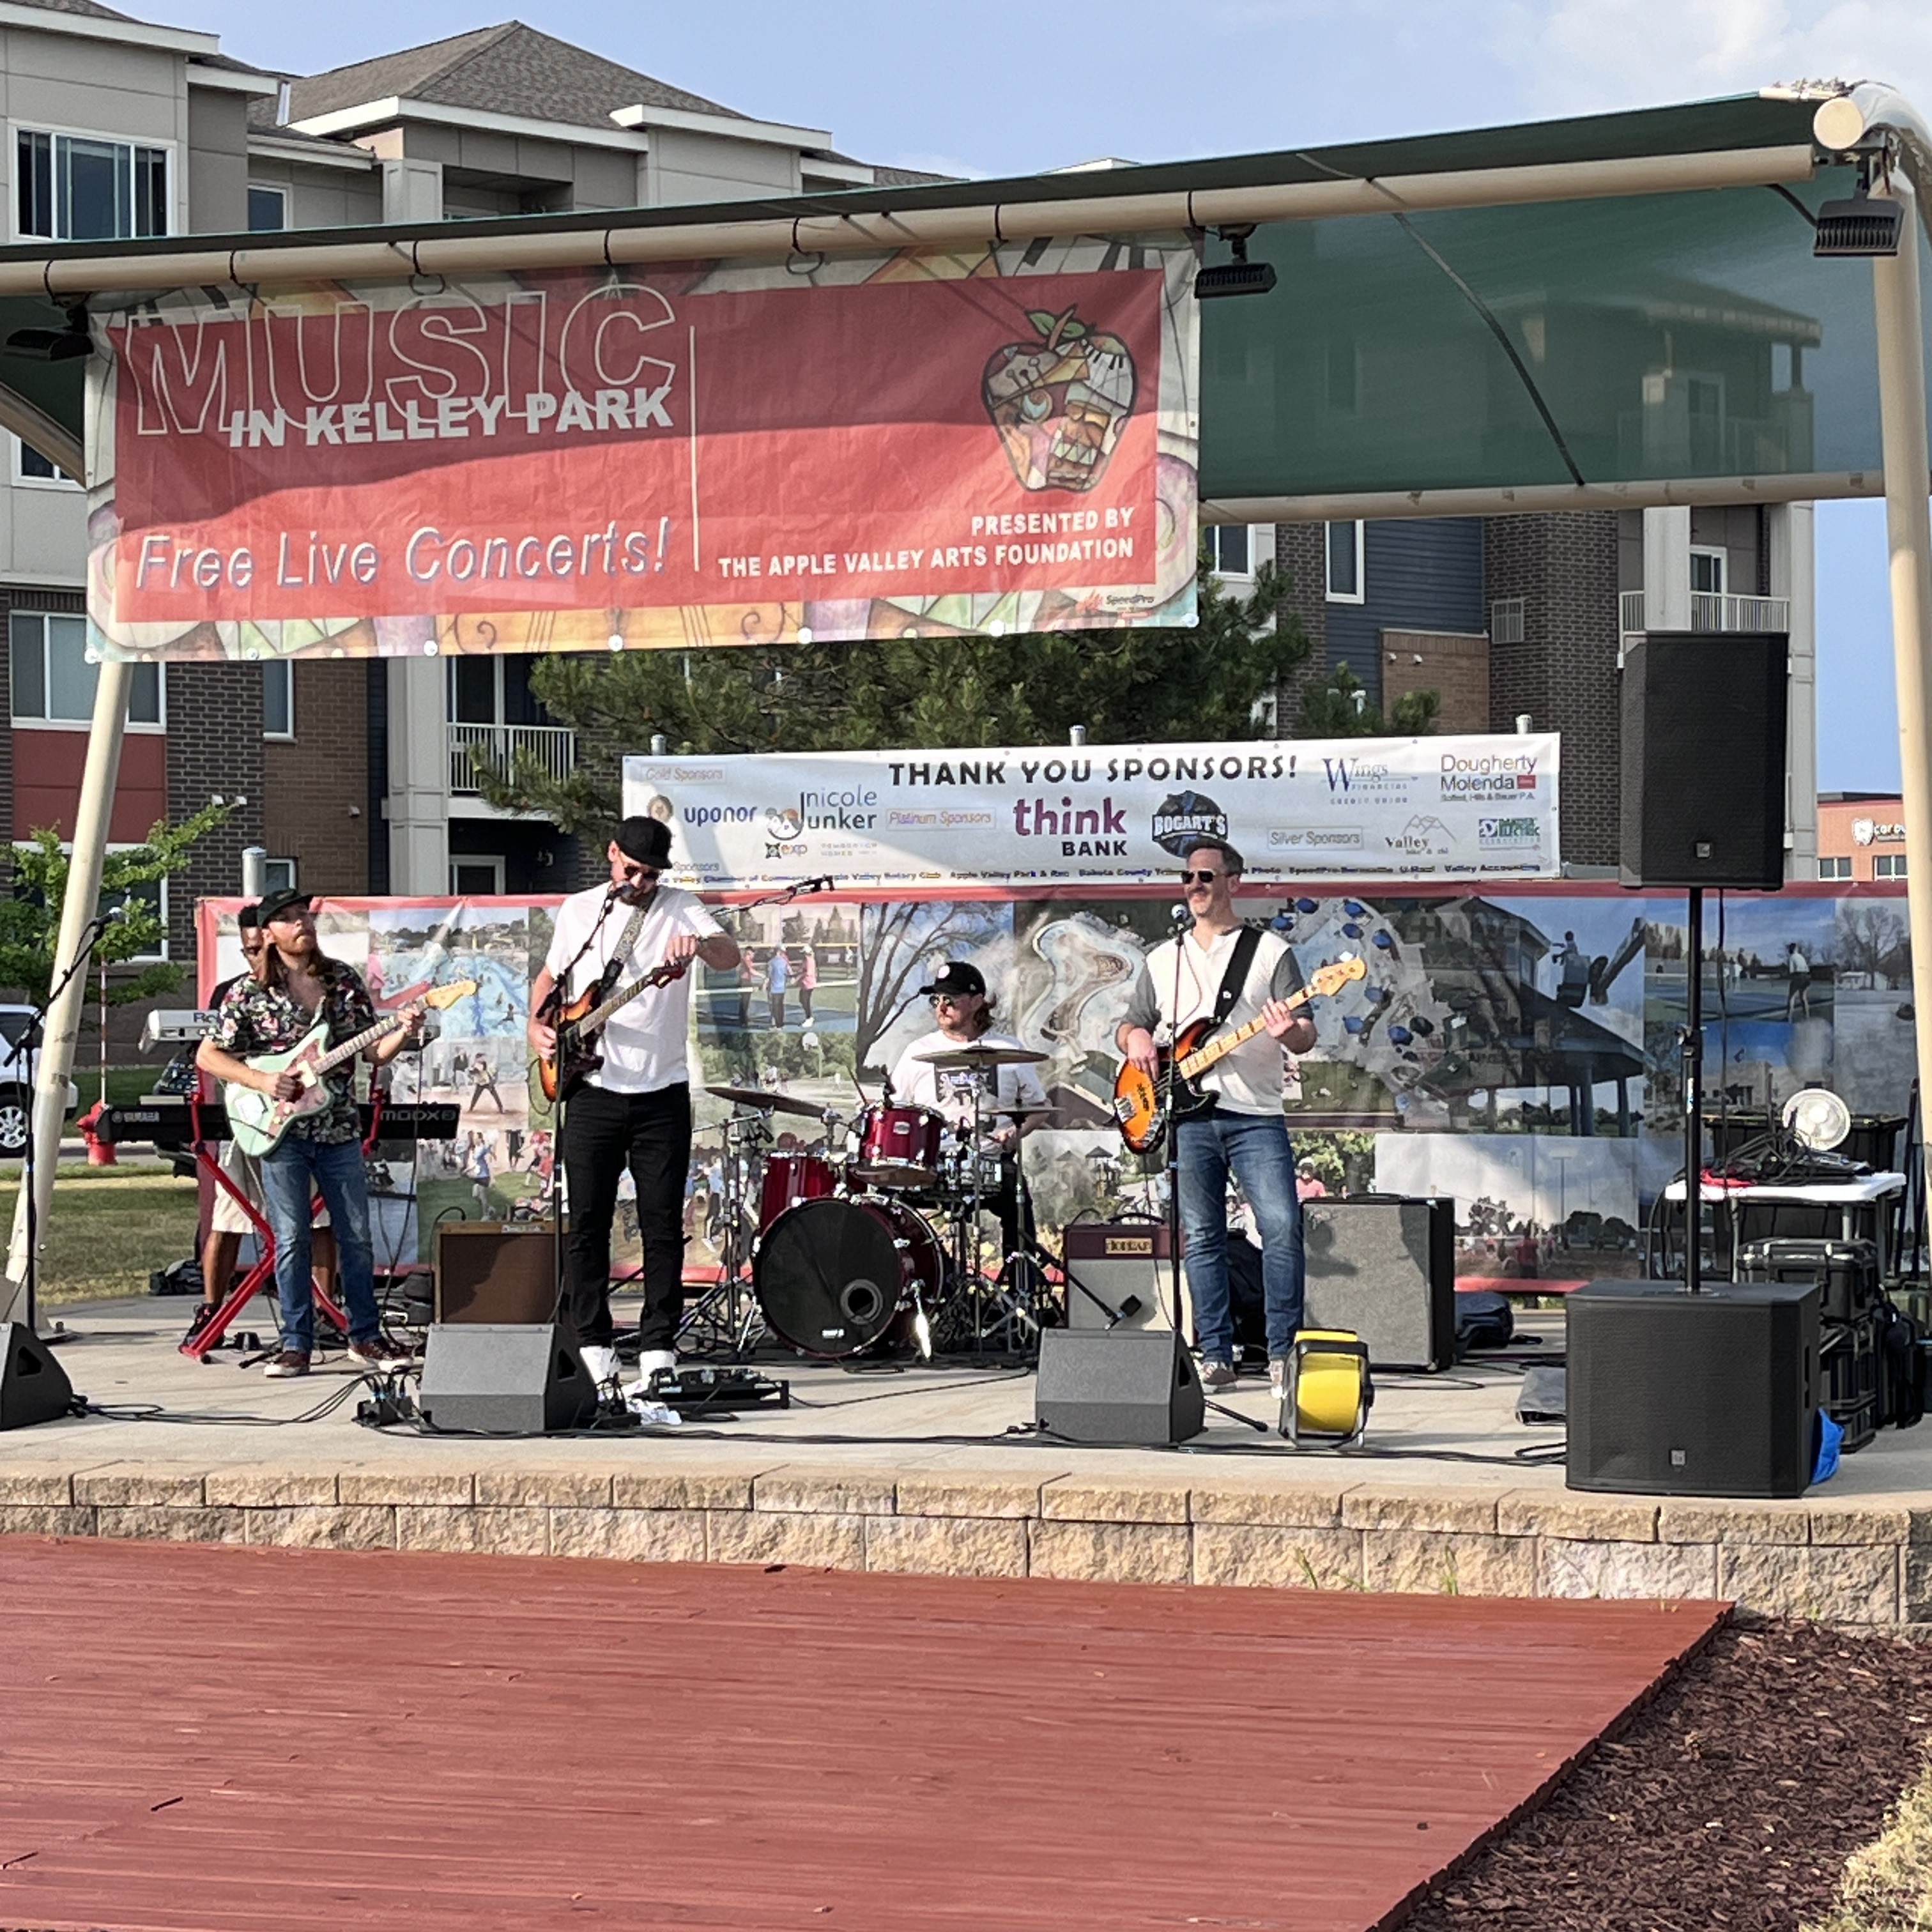 A band performing at Music in Kelly Park.